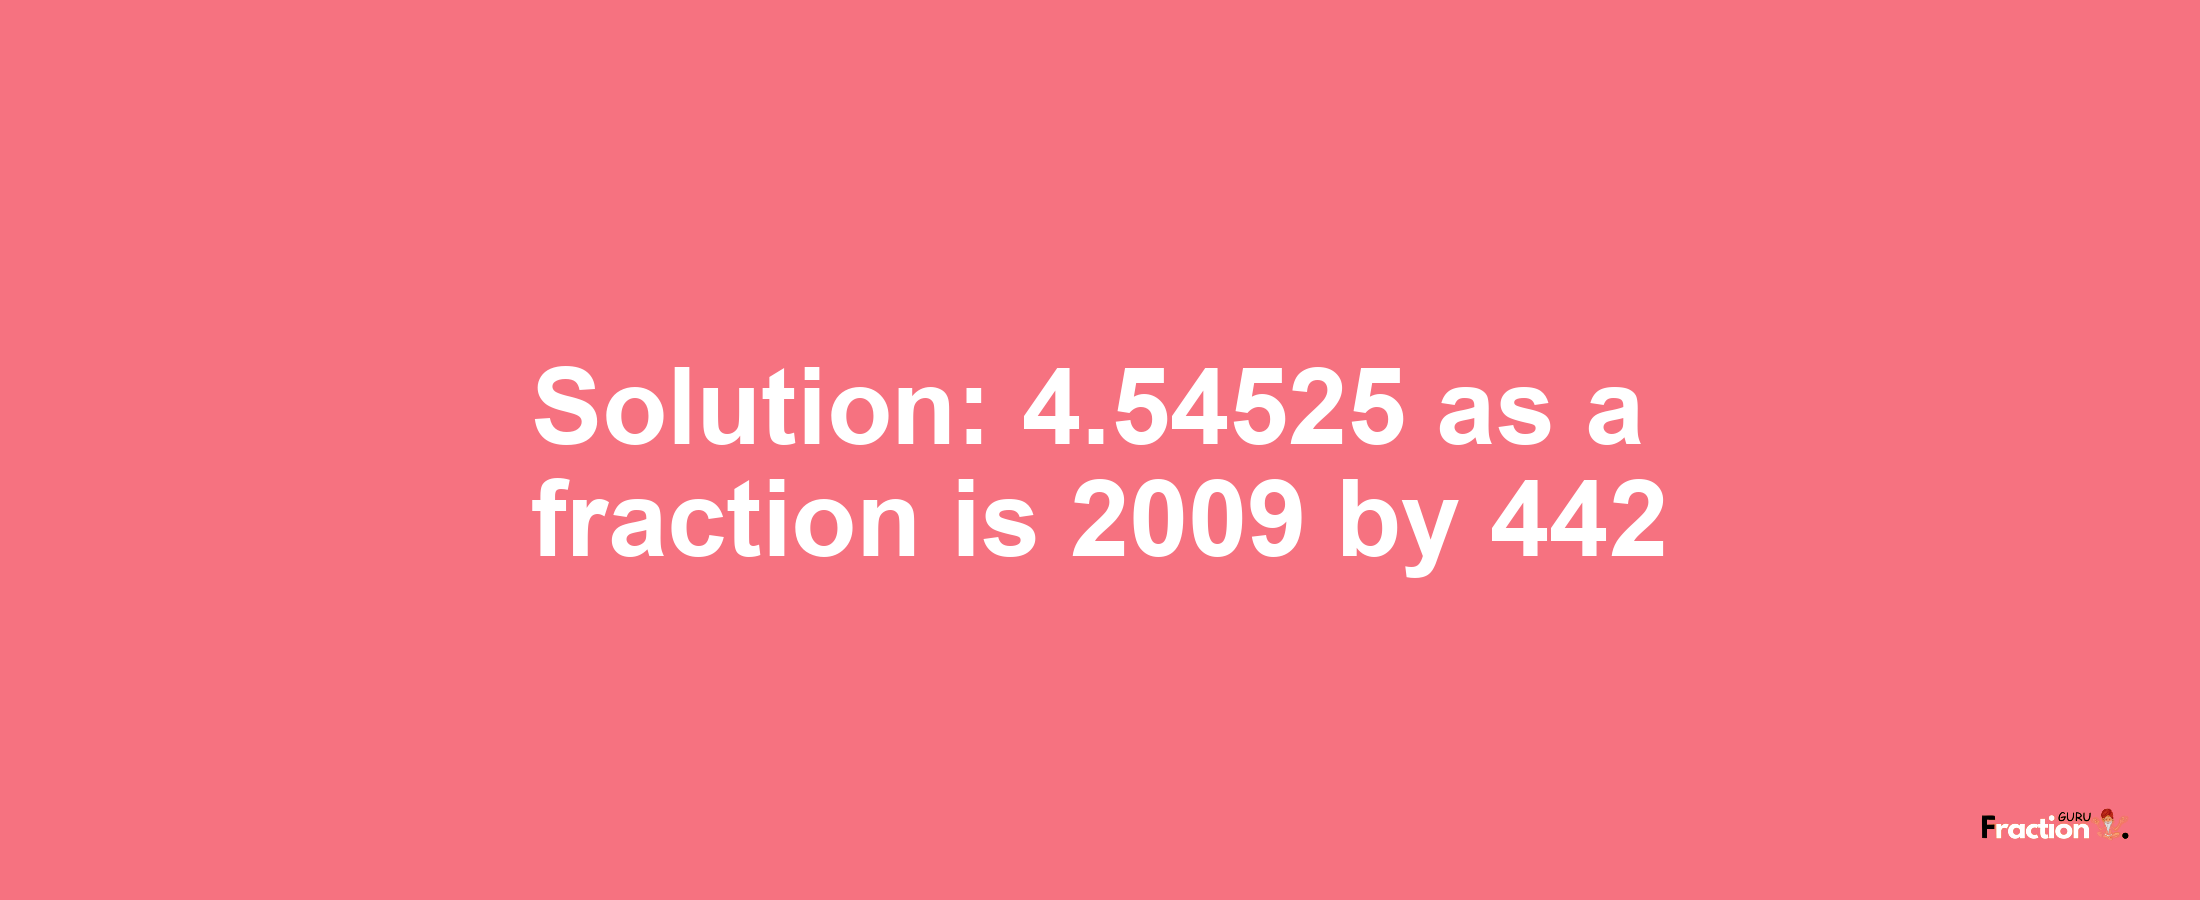 Solution:4.54525 as a fraction is 2009/442